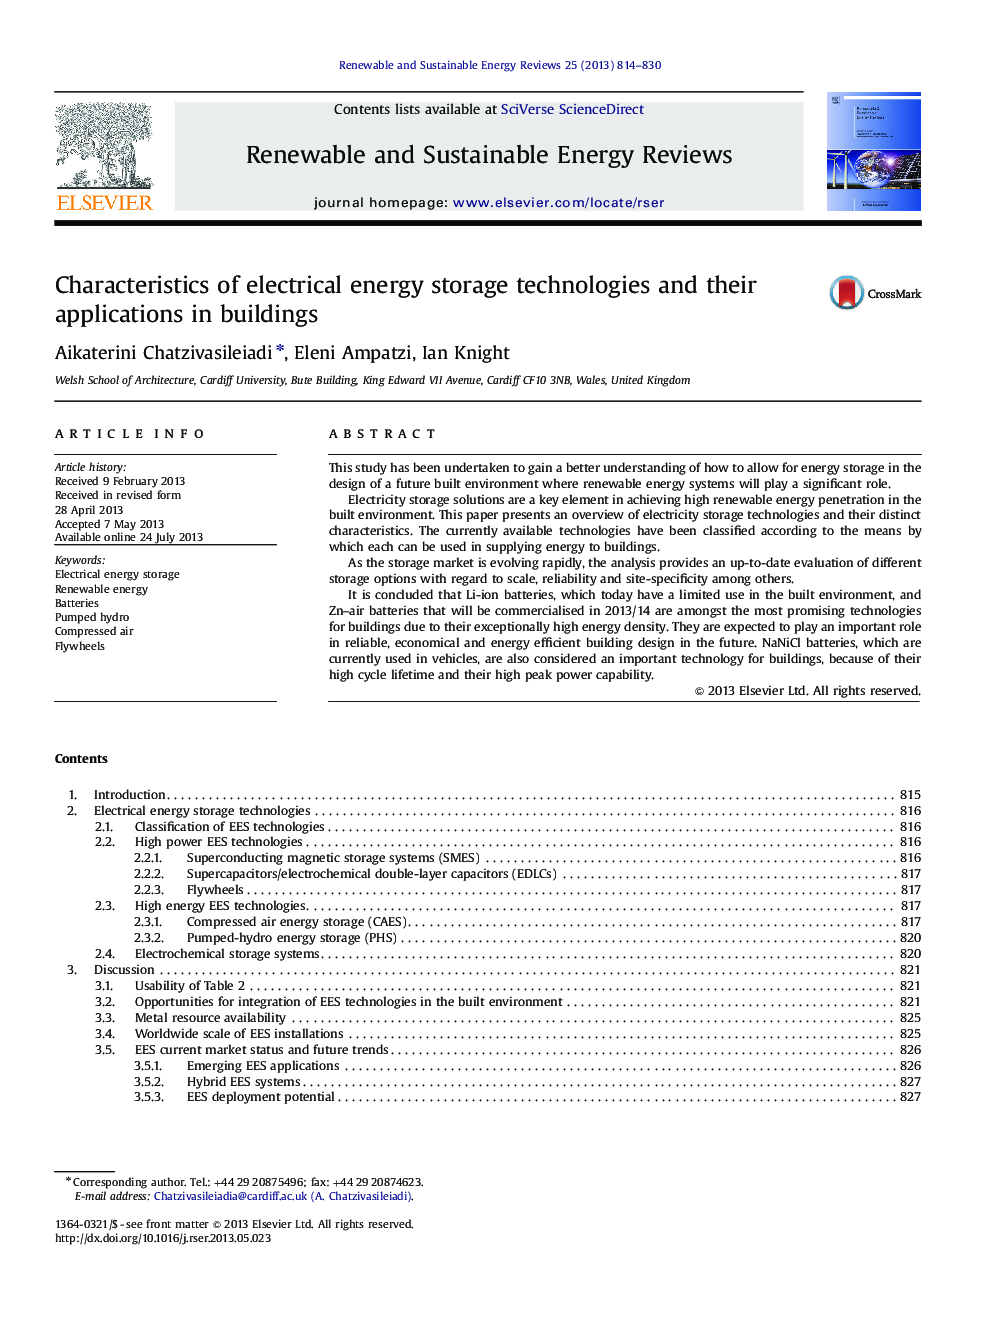 Characteristics of electrical energy storage technologies and their applications in buildings